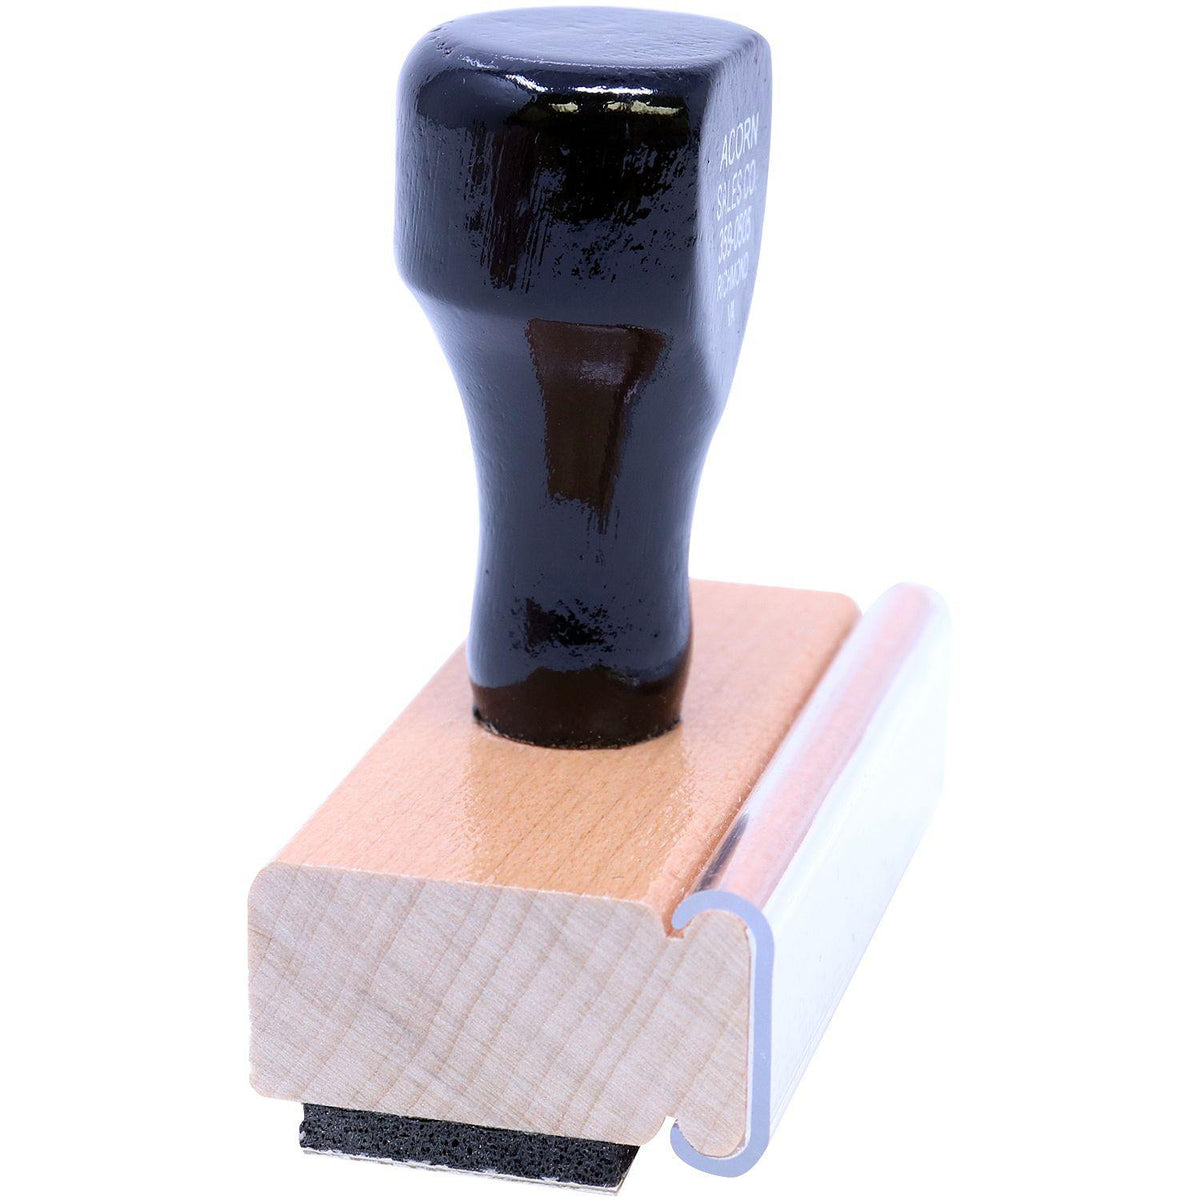 Side View of Large Entered with Date Box Rubber Stamp at an Angle